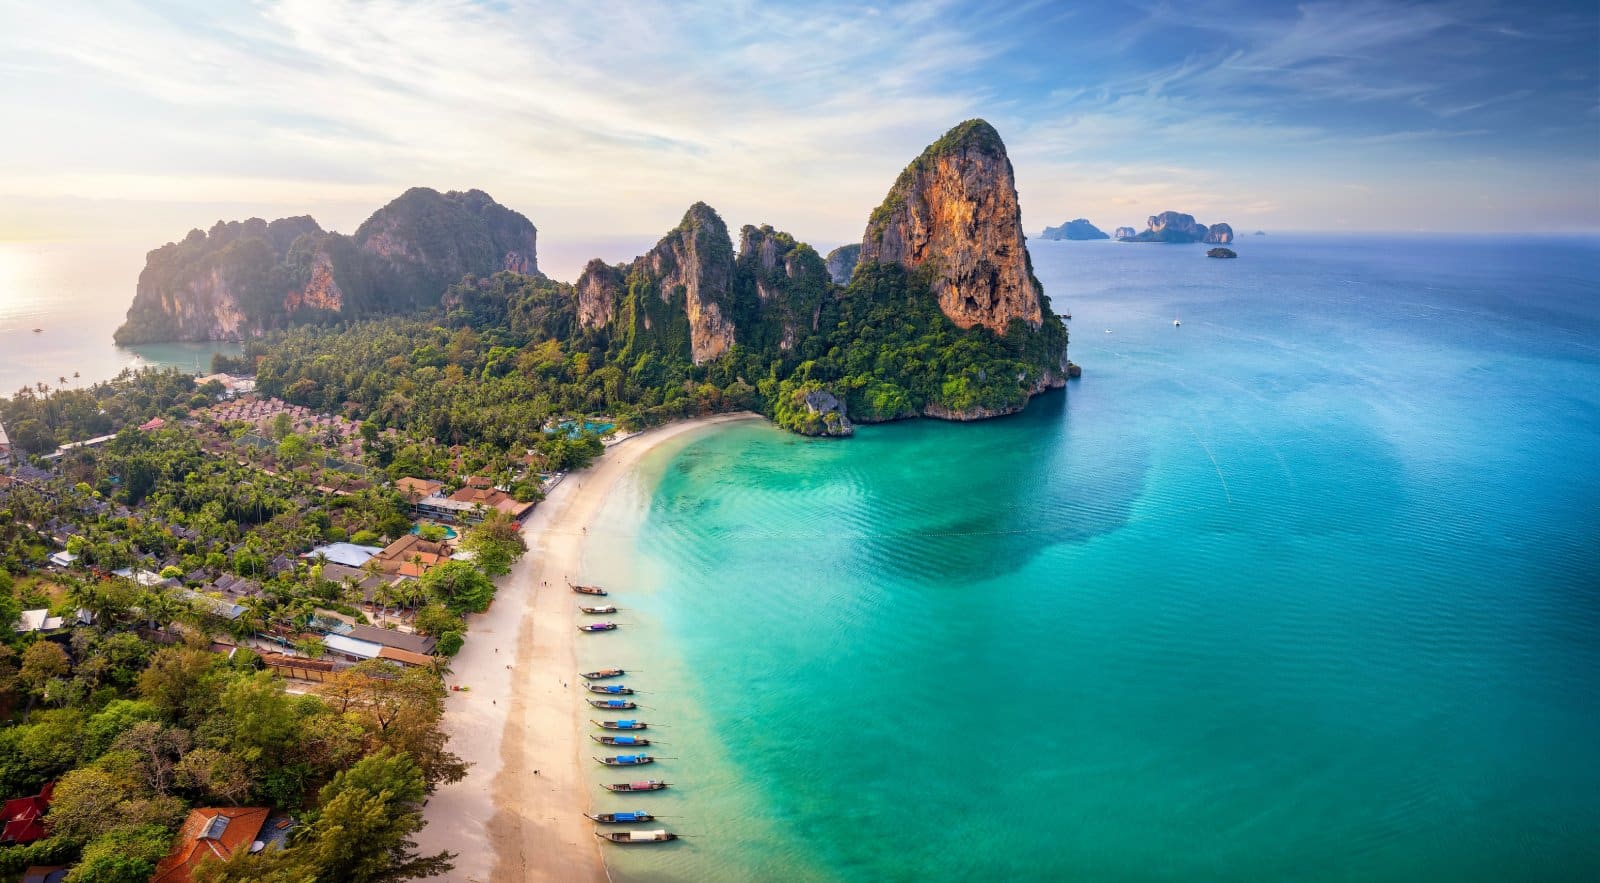 <p><span>In Krabi Province, you’ll find yourself amidst some of Thailand’s most picturesque landscapes, marked by dramatic limestone cliffs, pristine beaches, and clear blue waters. The province is renowned for destinations like Railay Beach, which is accessible only by boat. It offers world-class rock climbing and stunning beachscapes.</span></p> <p><span>The Phi Phi Islands, with their iconic beaches and vibrant marine life, are perfect for day trips, offering opportunities for snorkeling and diving. For a more tranquil experience, the lesser-known Koh Lanta provides a laid-back atmosphere with its long, sandy beaches. </span><span>Krabi’s natural beauty extends beyond its coastline, with inland attractions like the Emerald Pool and the Tiger Cave Temple, each offering unique experiences.</span></p> <p><span>Whether you’re seeking adventure on the cliffs of Railay or tranquility on the beaches of Koh Lanta, Krabi presents a diverse array of natural wonders waiting to be explored.</span></p> <p><b>Insider’s Tip: </b><span>Explore the mangroves and limestone caves by kayak for a unique perspective.</span></p> <p><b>How To Get There: </b><span>Krabi has an airport, and it’s also accessible by bus and boat from other parts of Thailand.</span></p> <p><b>Best Time To Travel: </b><span>Visit from November to March for the best beach weather.</span></p>